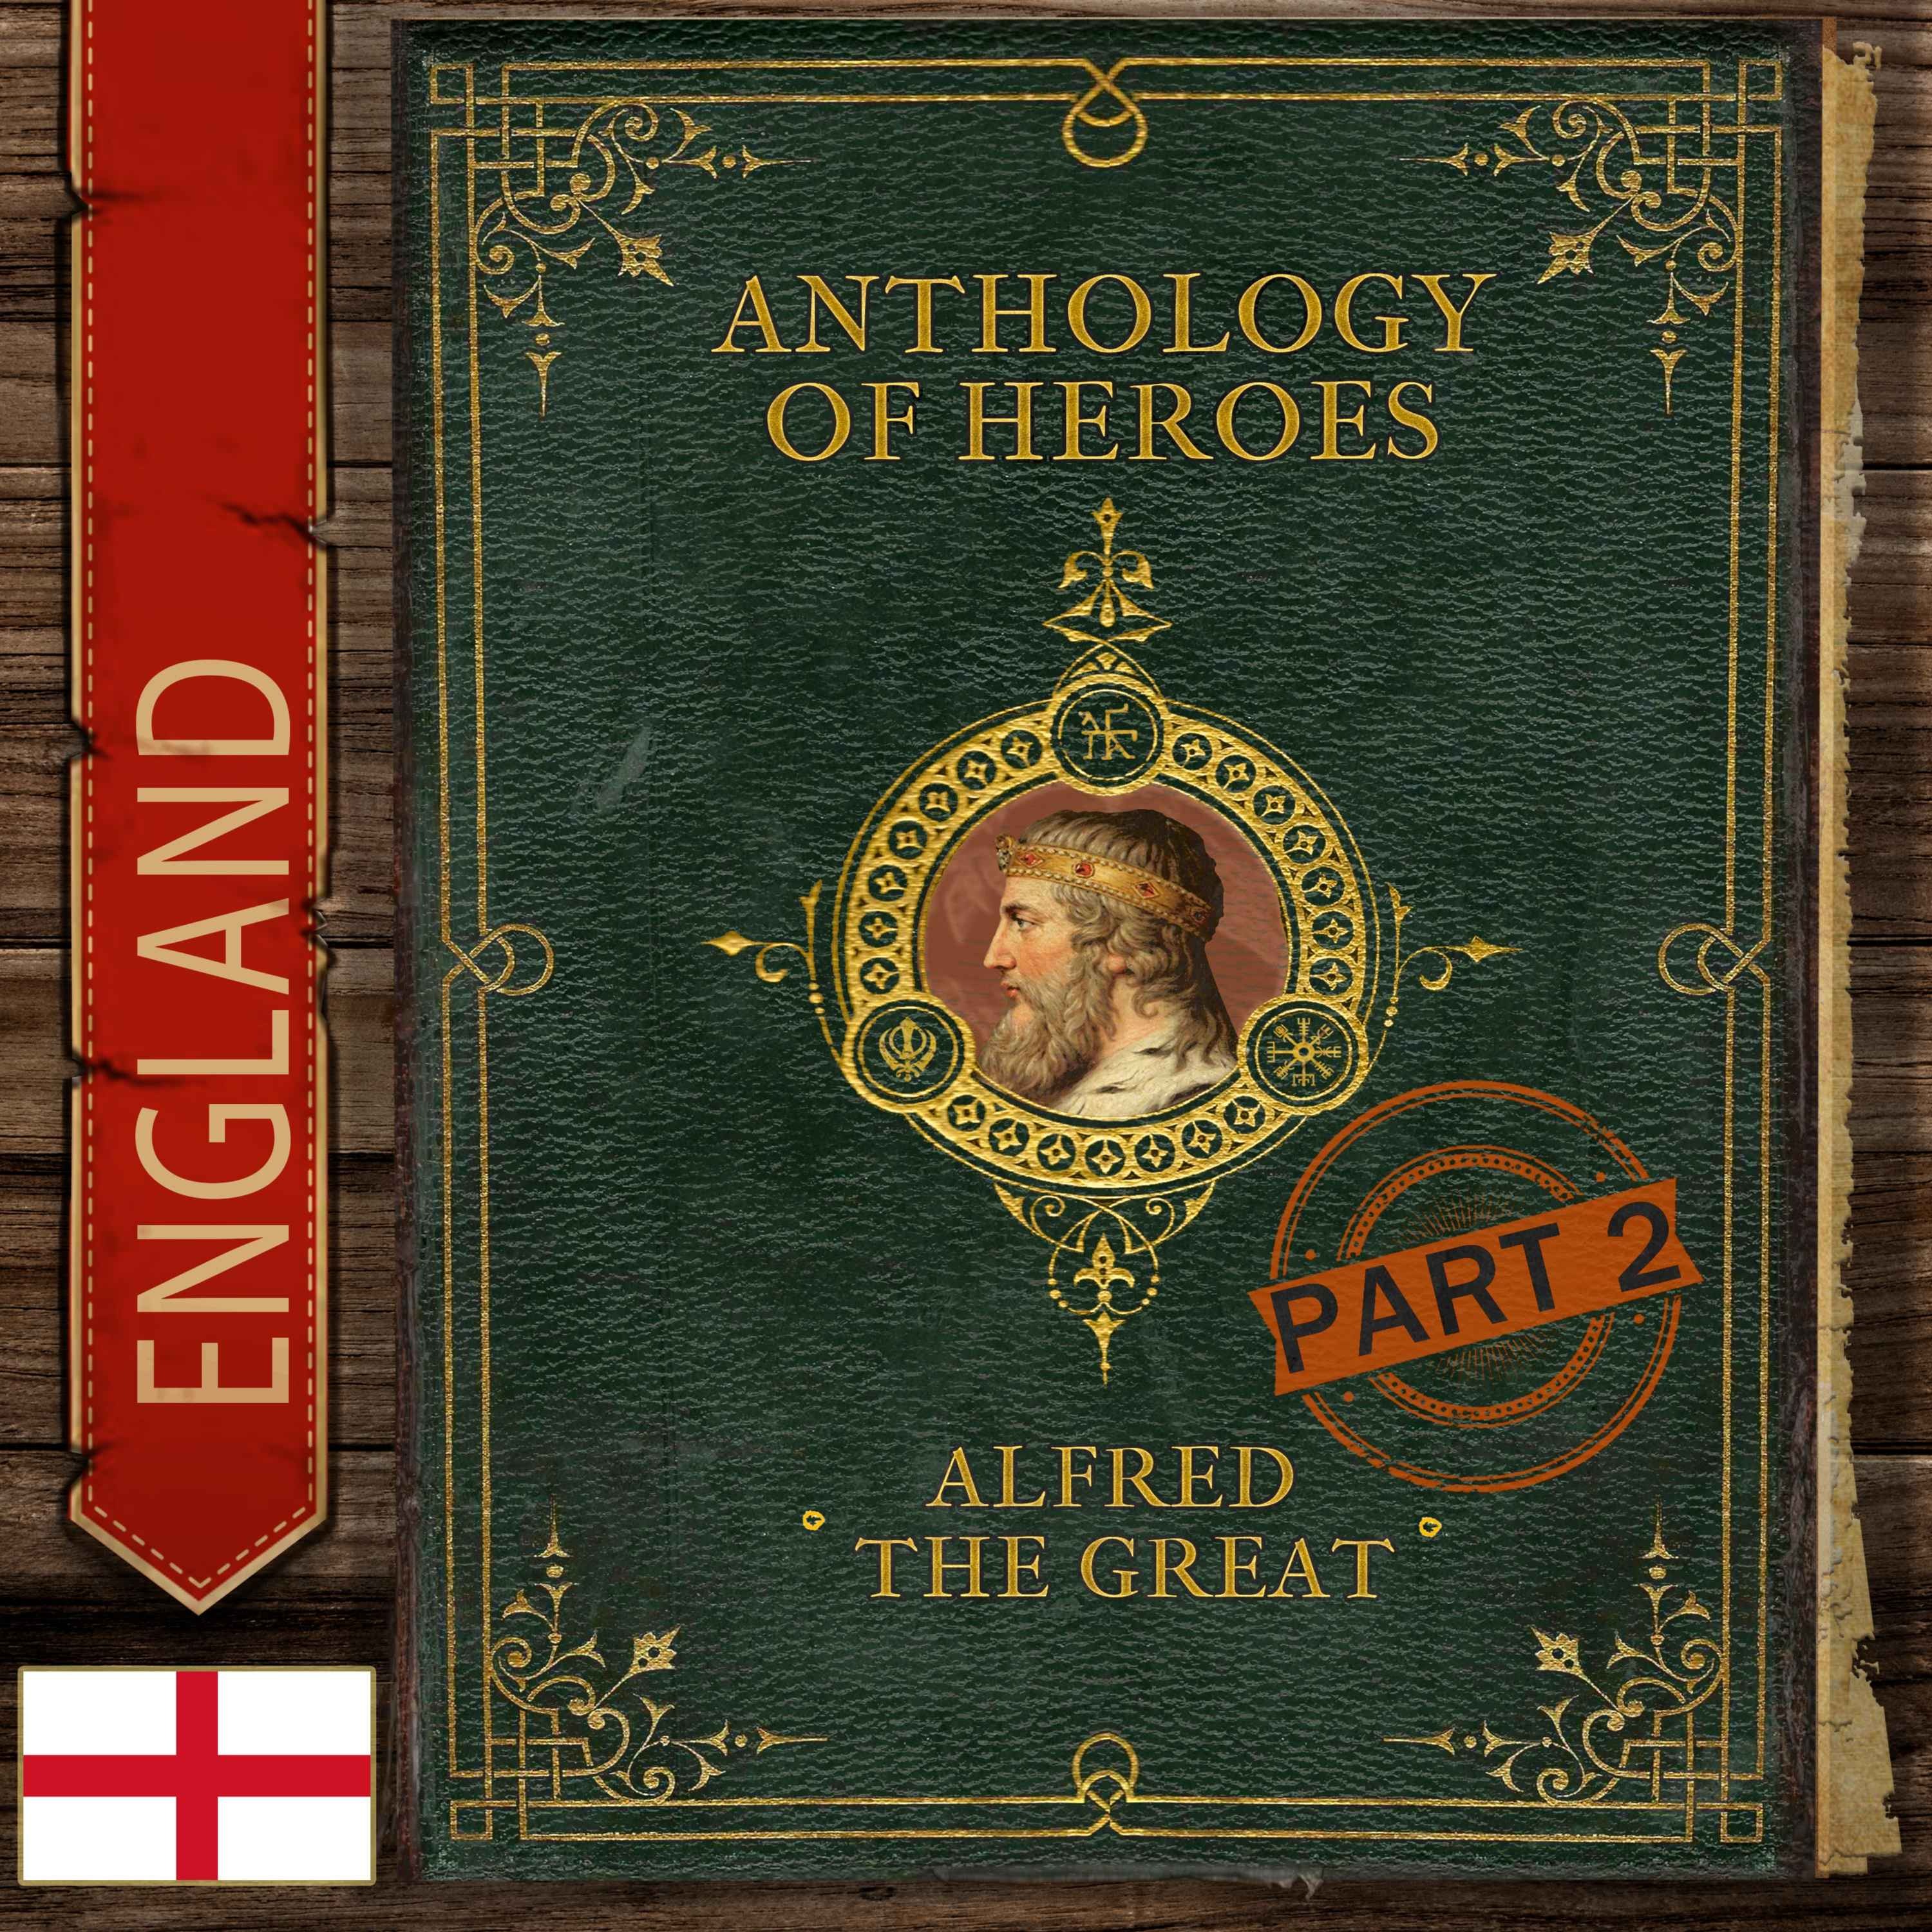 Alfred The Great And The Last Kingdom (Part 2) Image